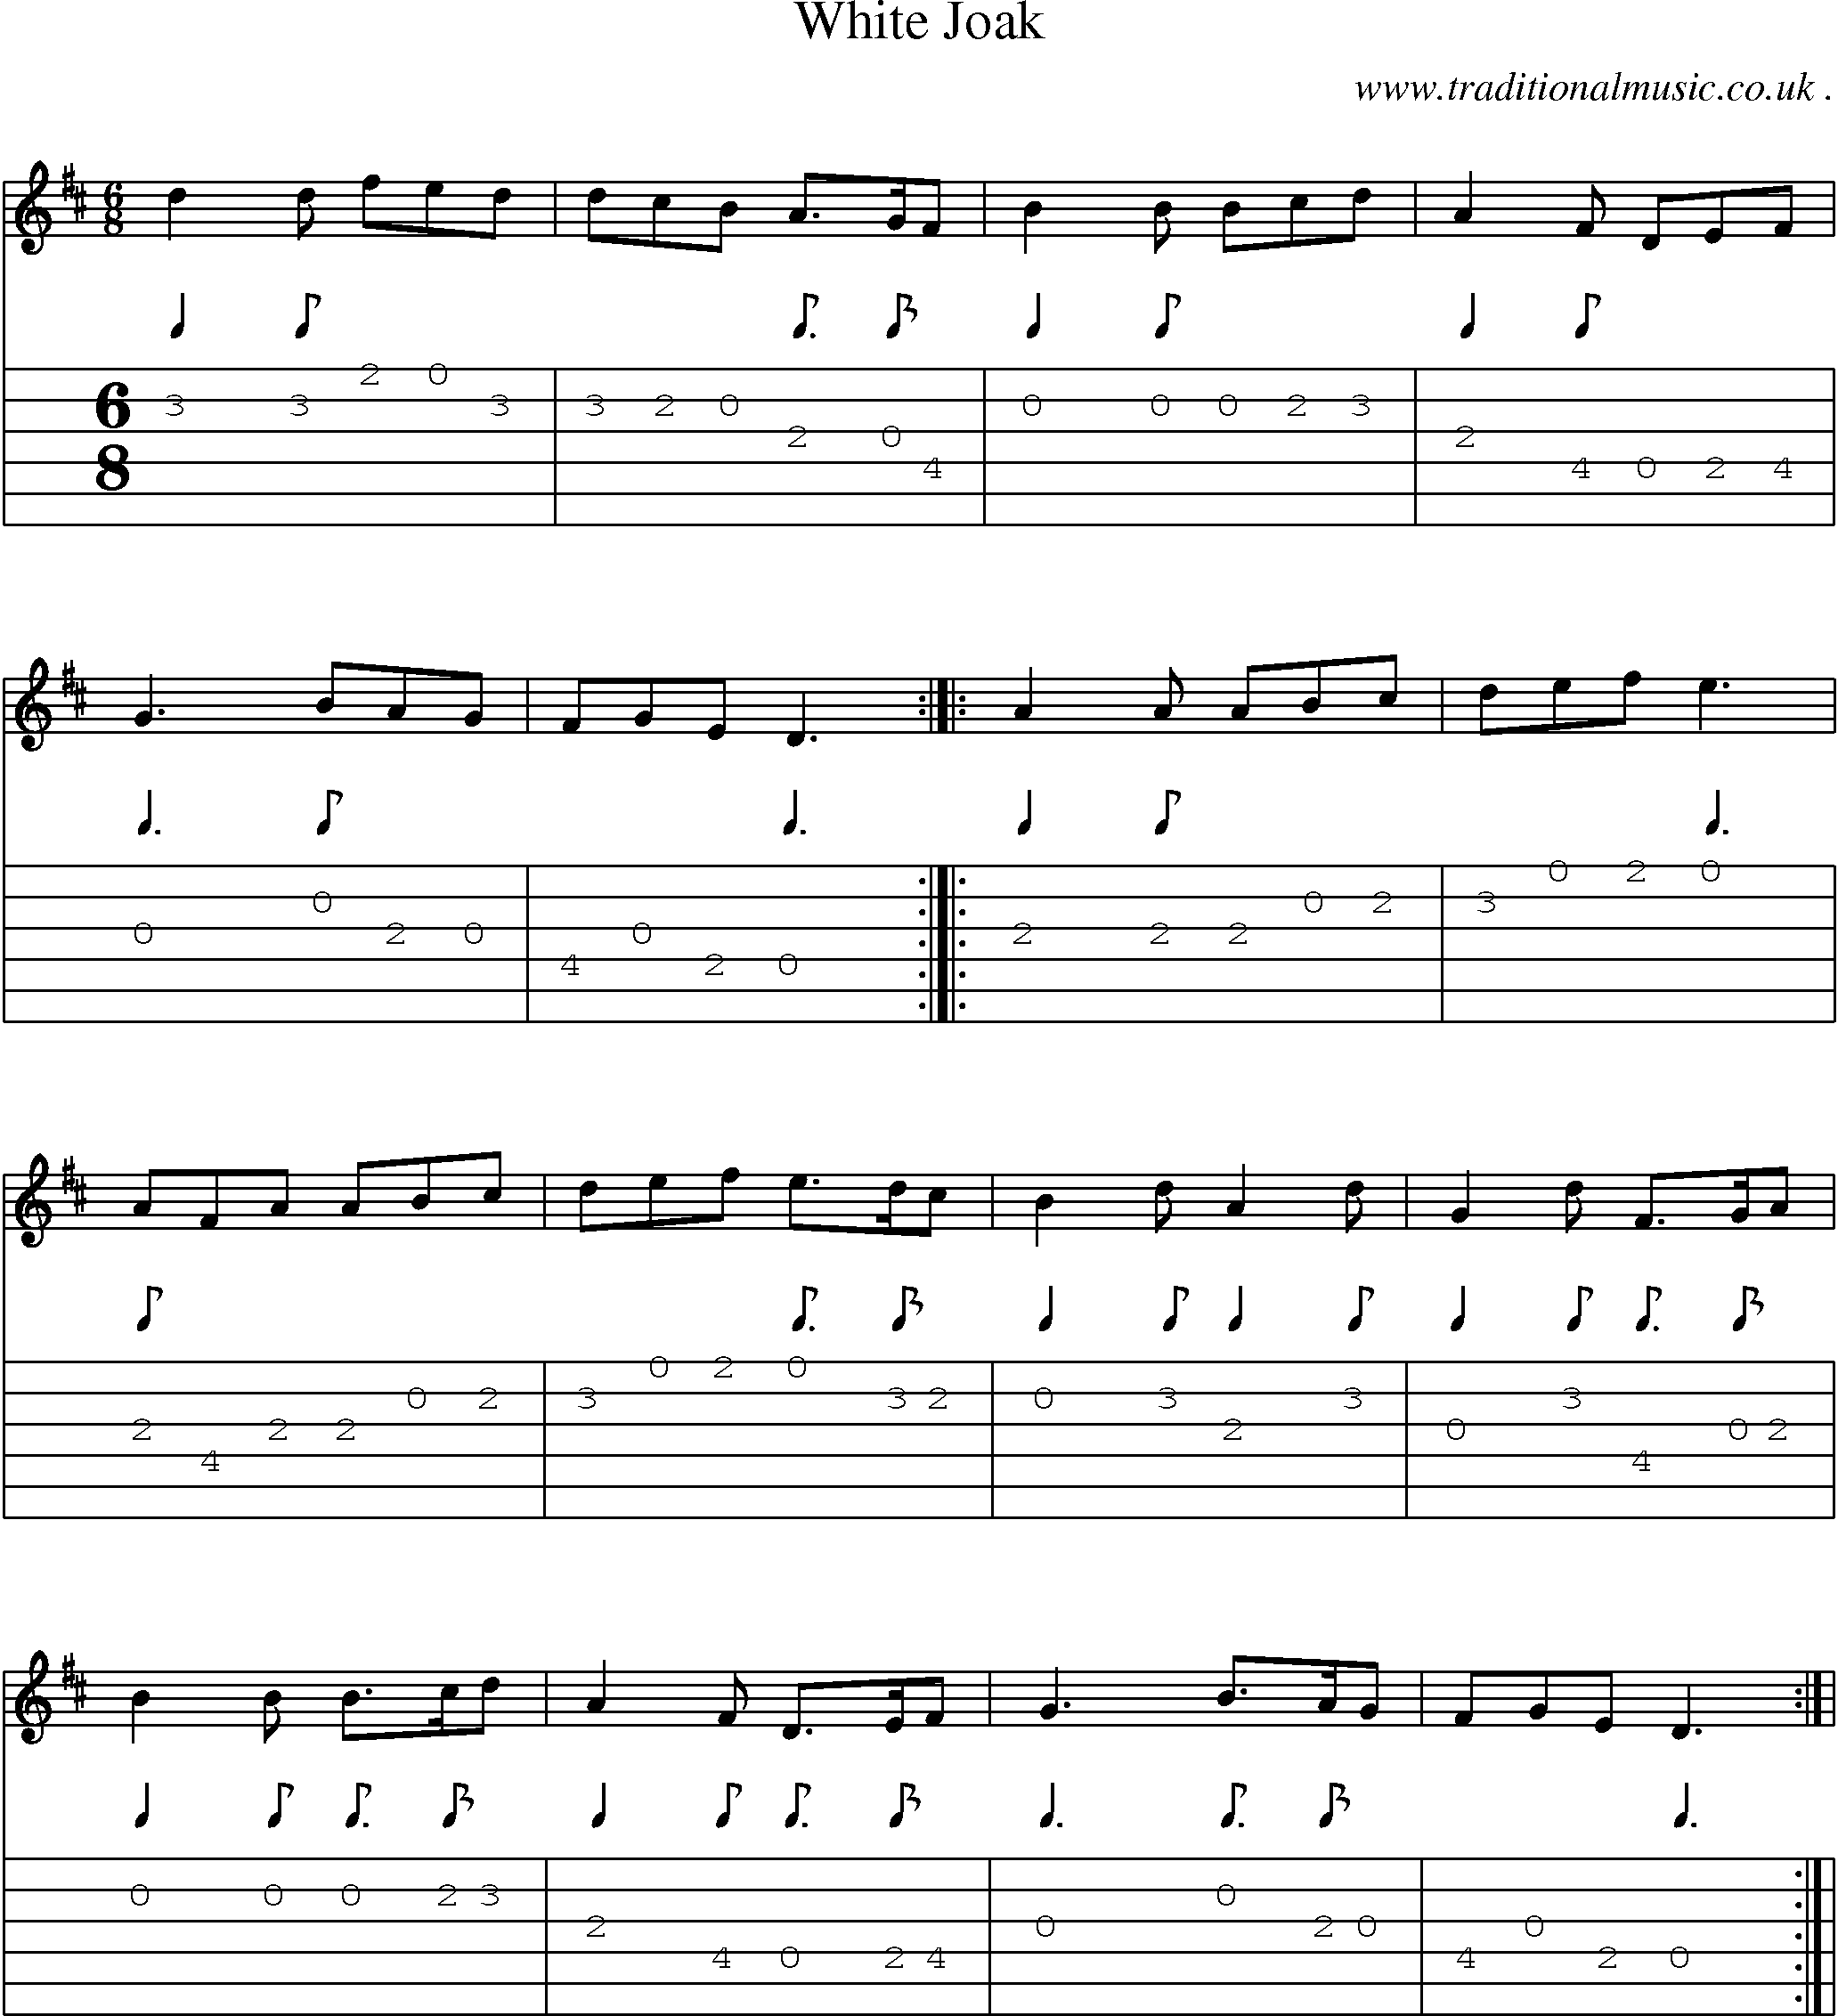 Sheet-Music and Guitar Tabs for White Joak